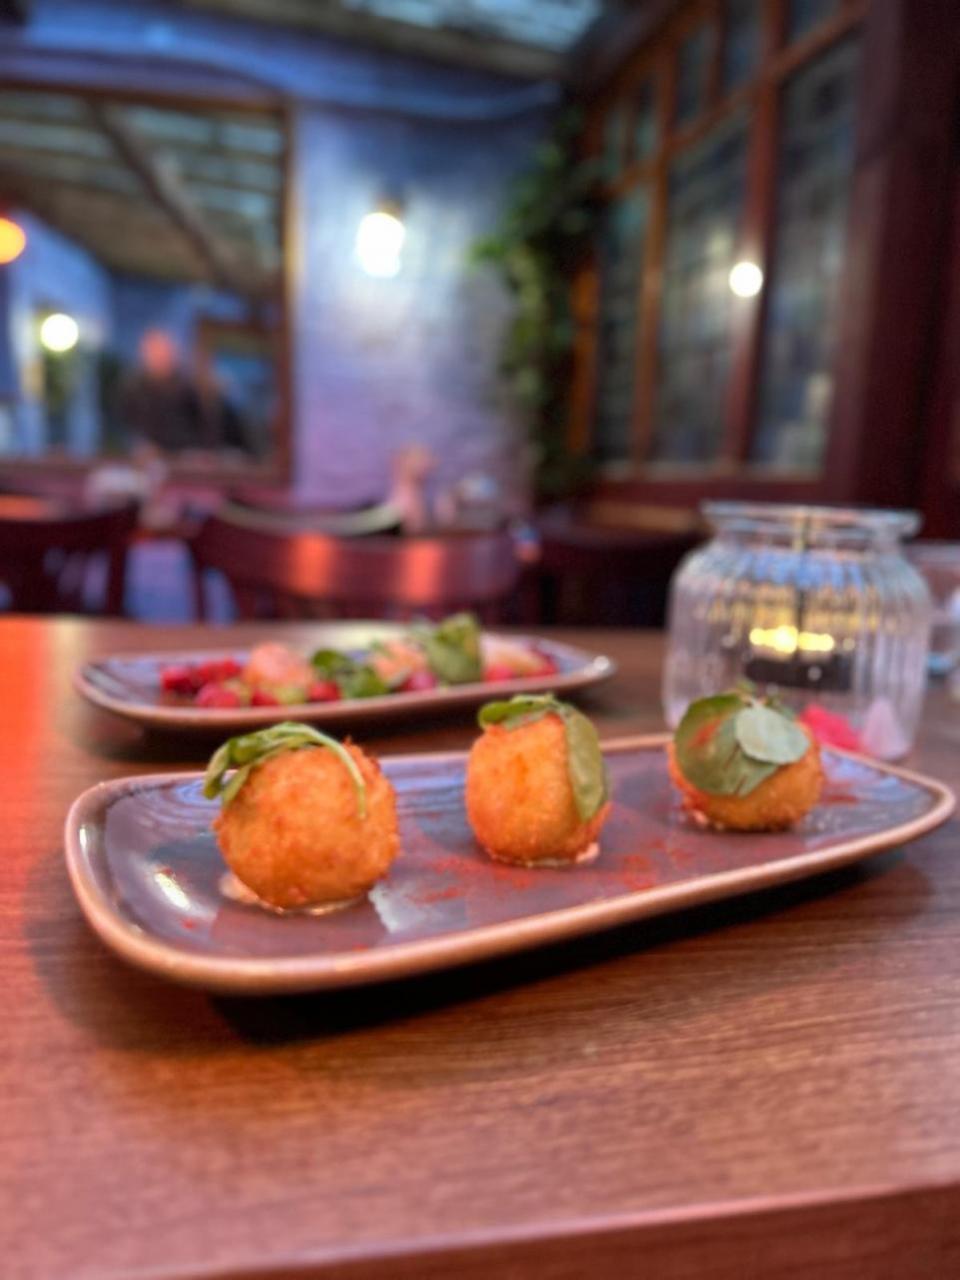 News Shopper: To start we got some small plates to share including ham hock and cheddar croquettes and pan-fried scallops.